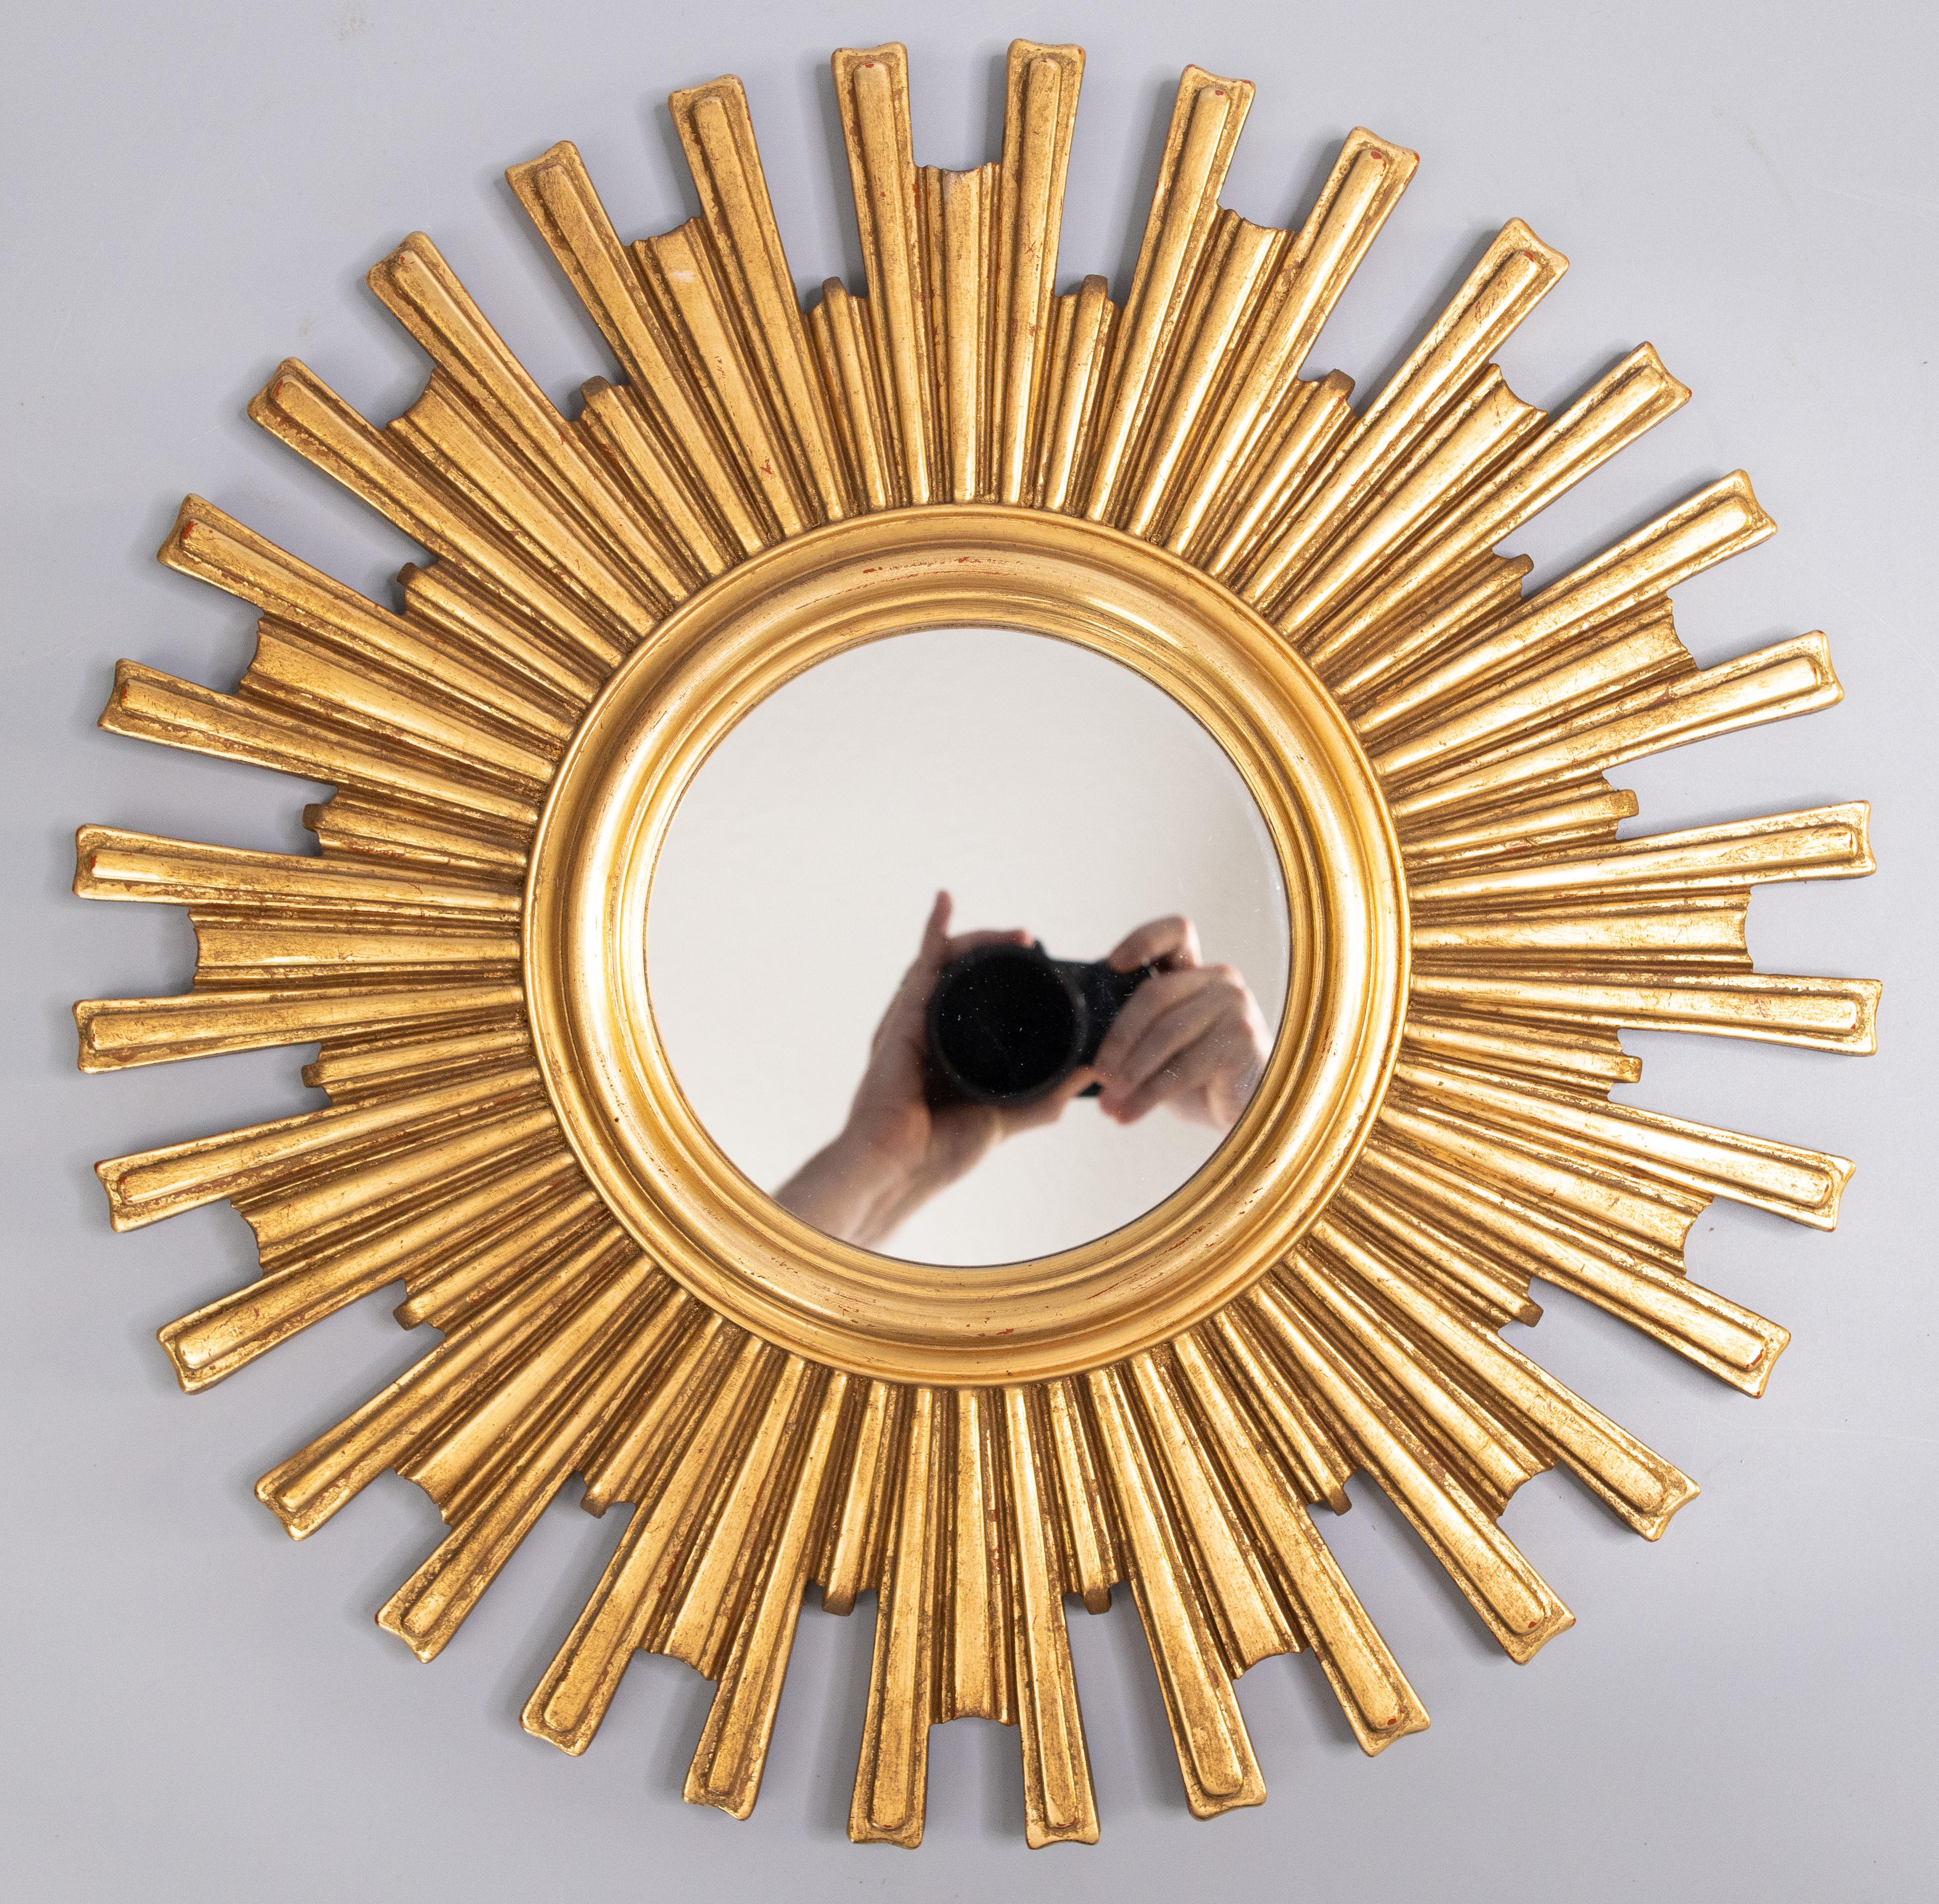 A stunning vintage Mid-20th Century French gilded resin sunburst / starburst mirror. This stylish mirror is surrounded by lovely rays of alternating lengths with a beautiful gilt patina.

DIMENSIONS
19.75